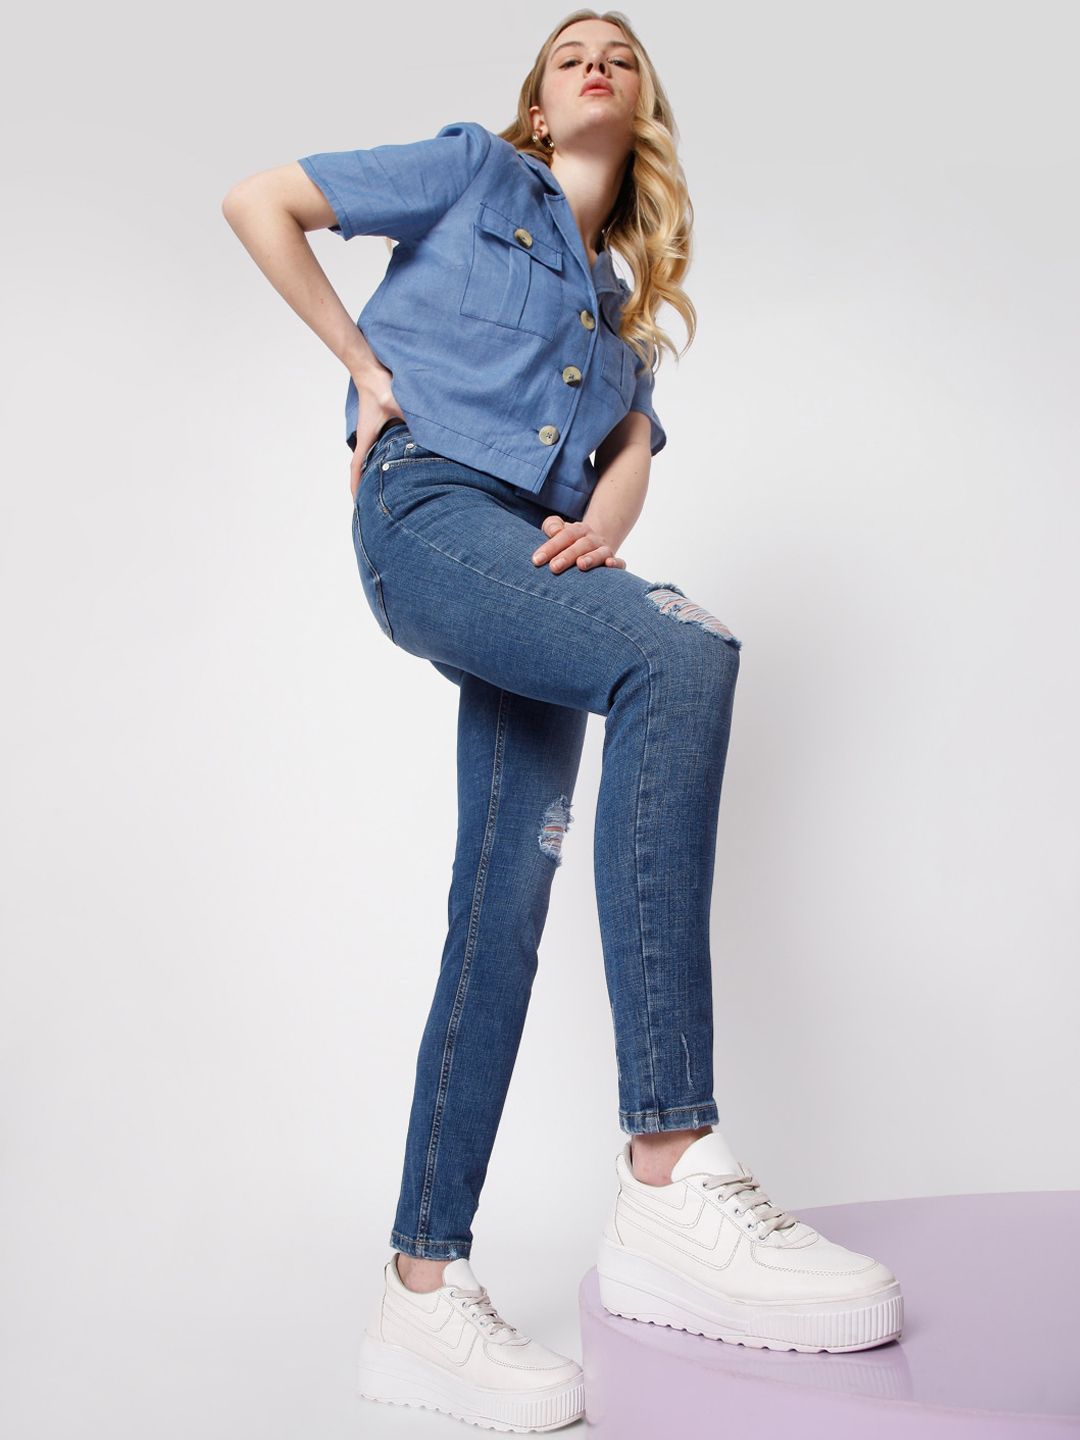 Vero Moda Women Blue Skinny Fit High-Rise Mildly Distressed Jeans Price in India